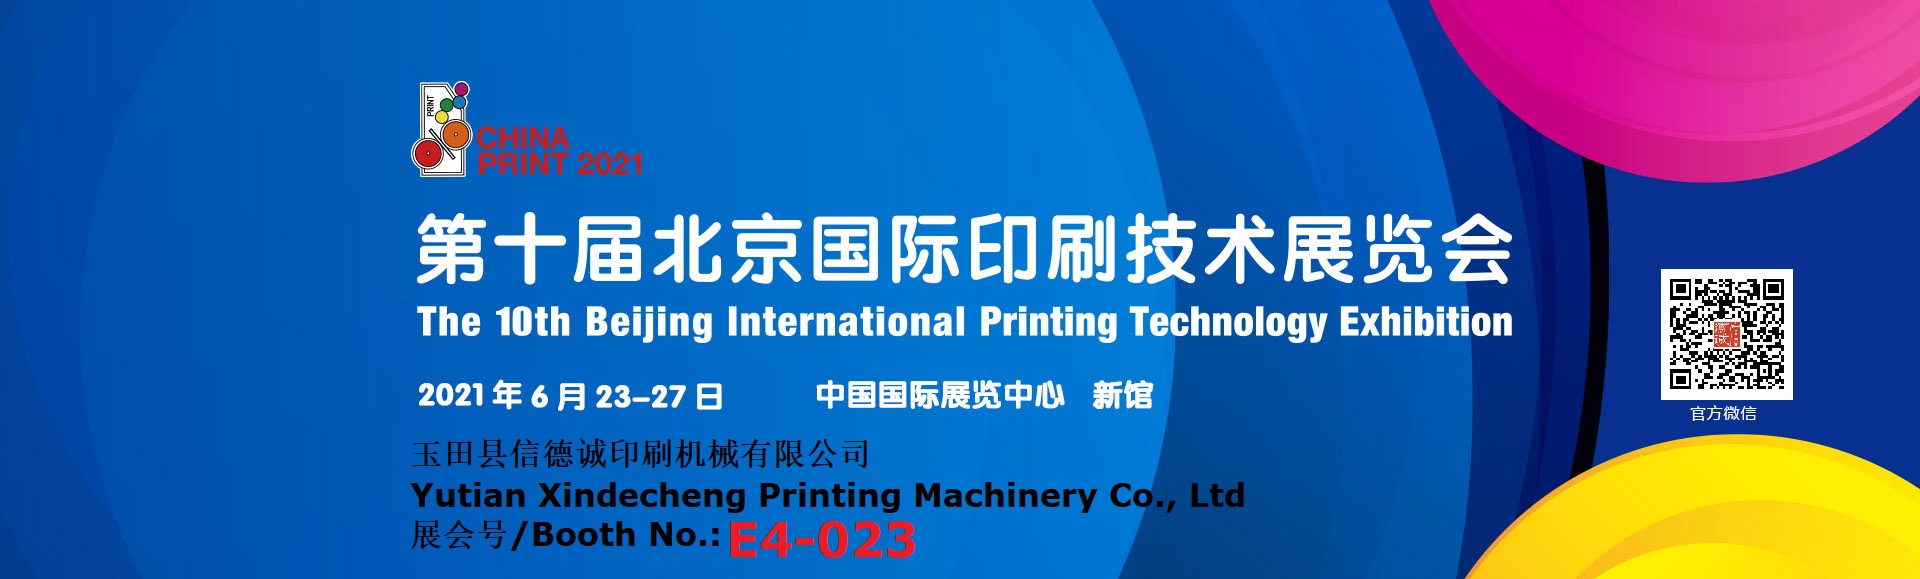 Xindecheng will attend China Print 2021 In Beijing